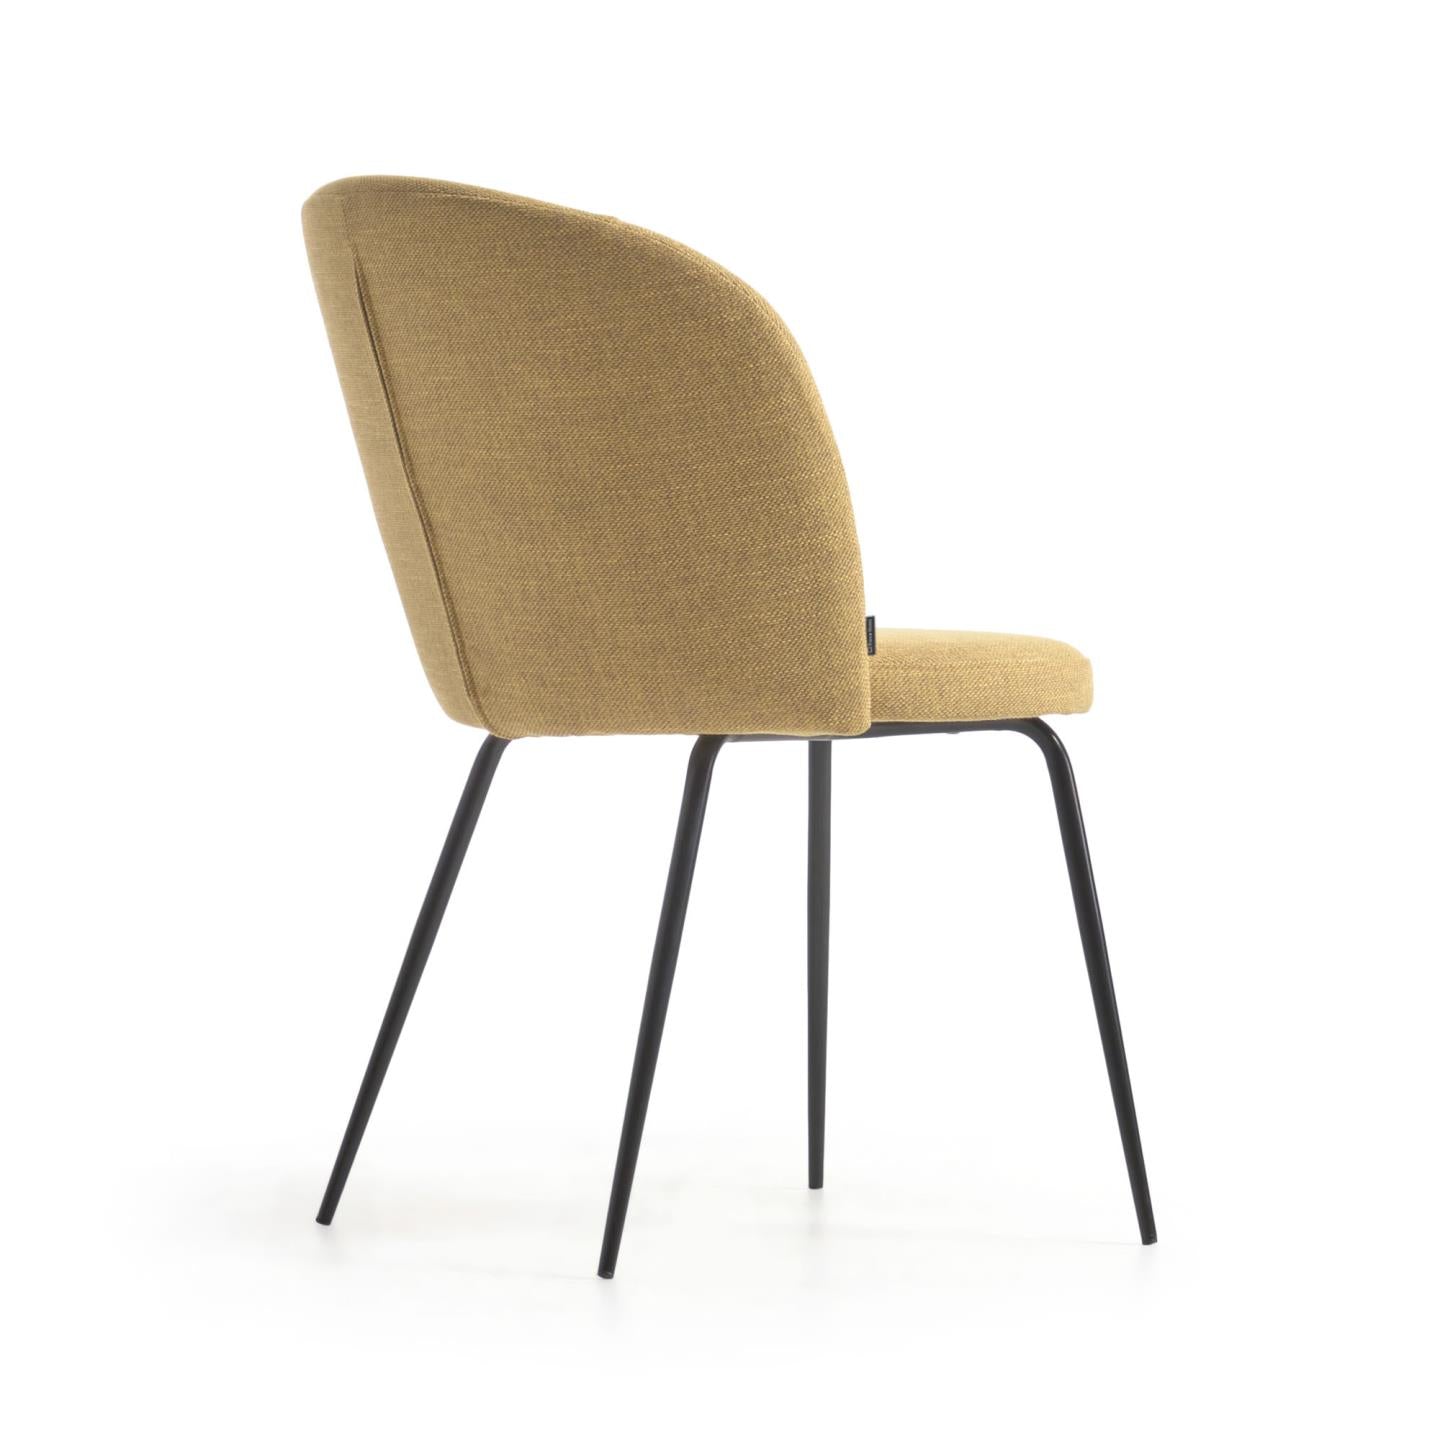 Anoha chair in mustard with metal with black finish